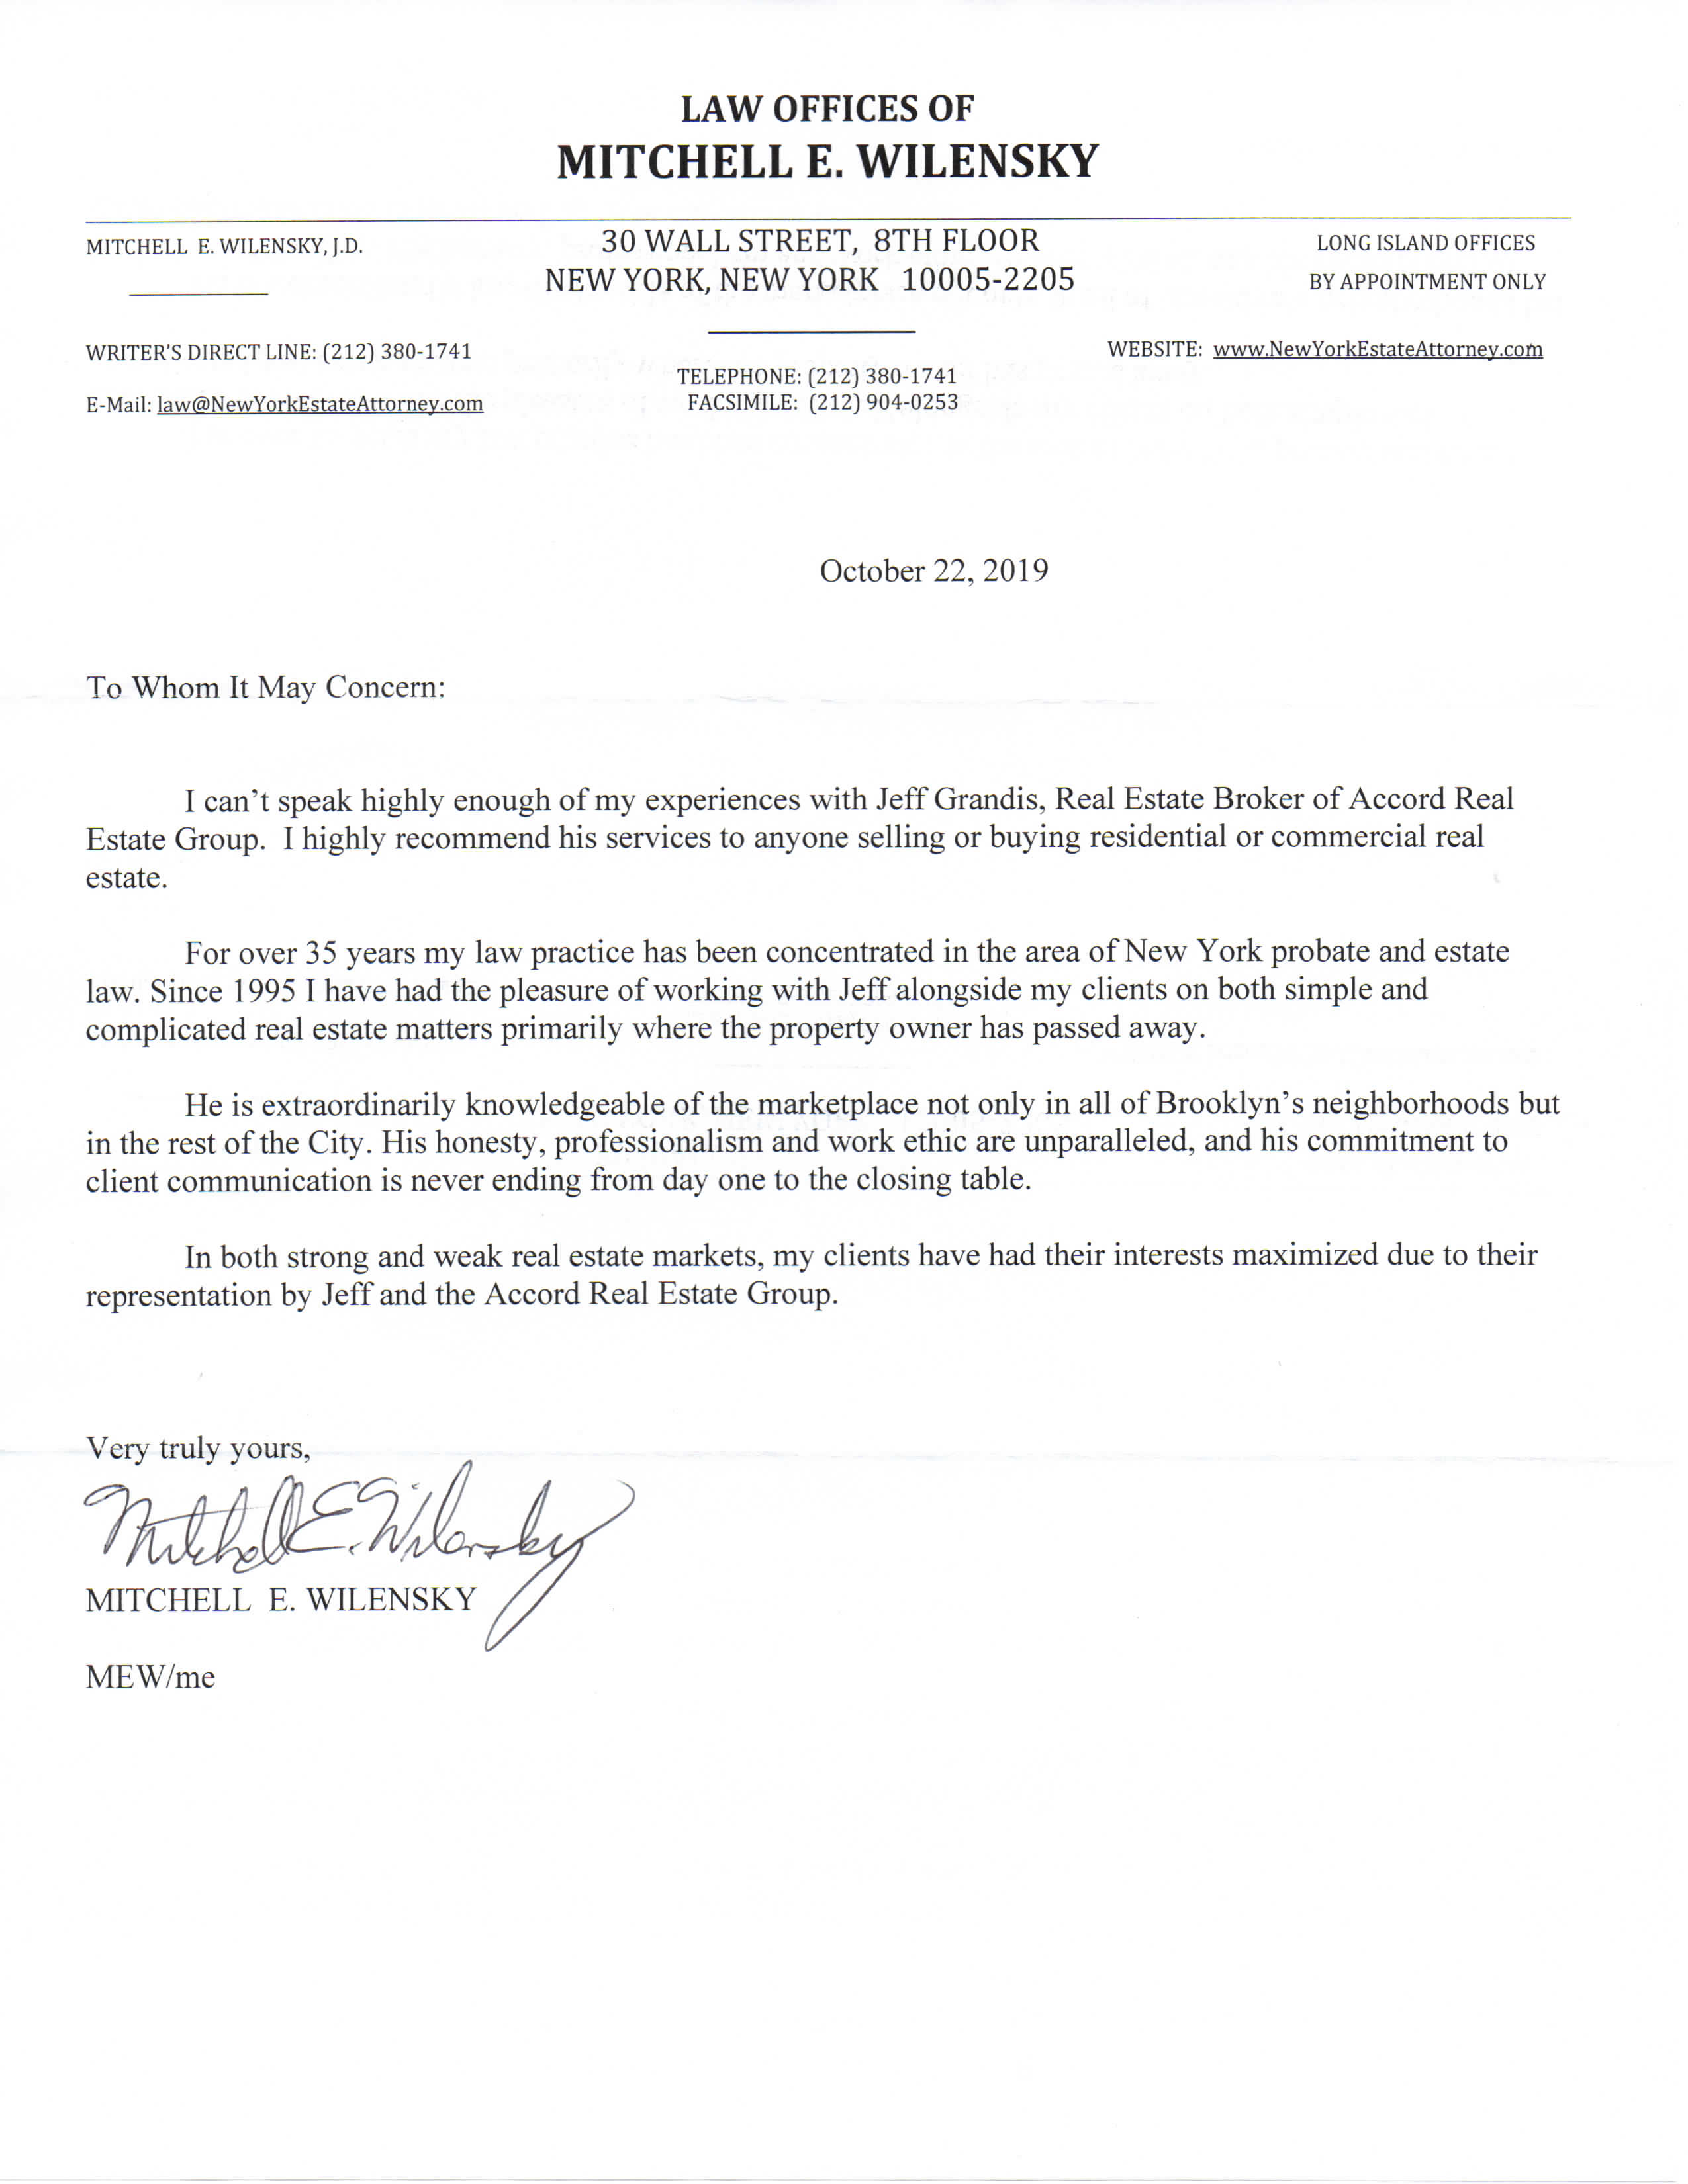 Testimonial Letter From Mitch Wilensky - 112919